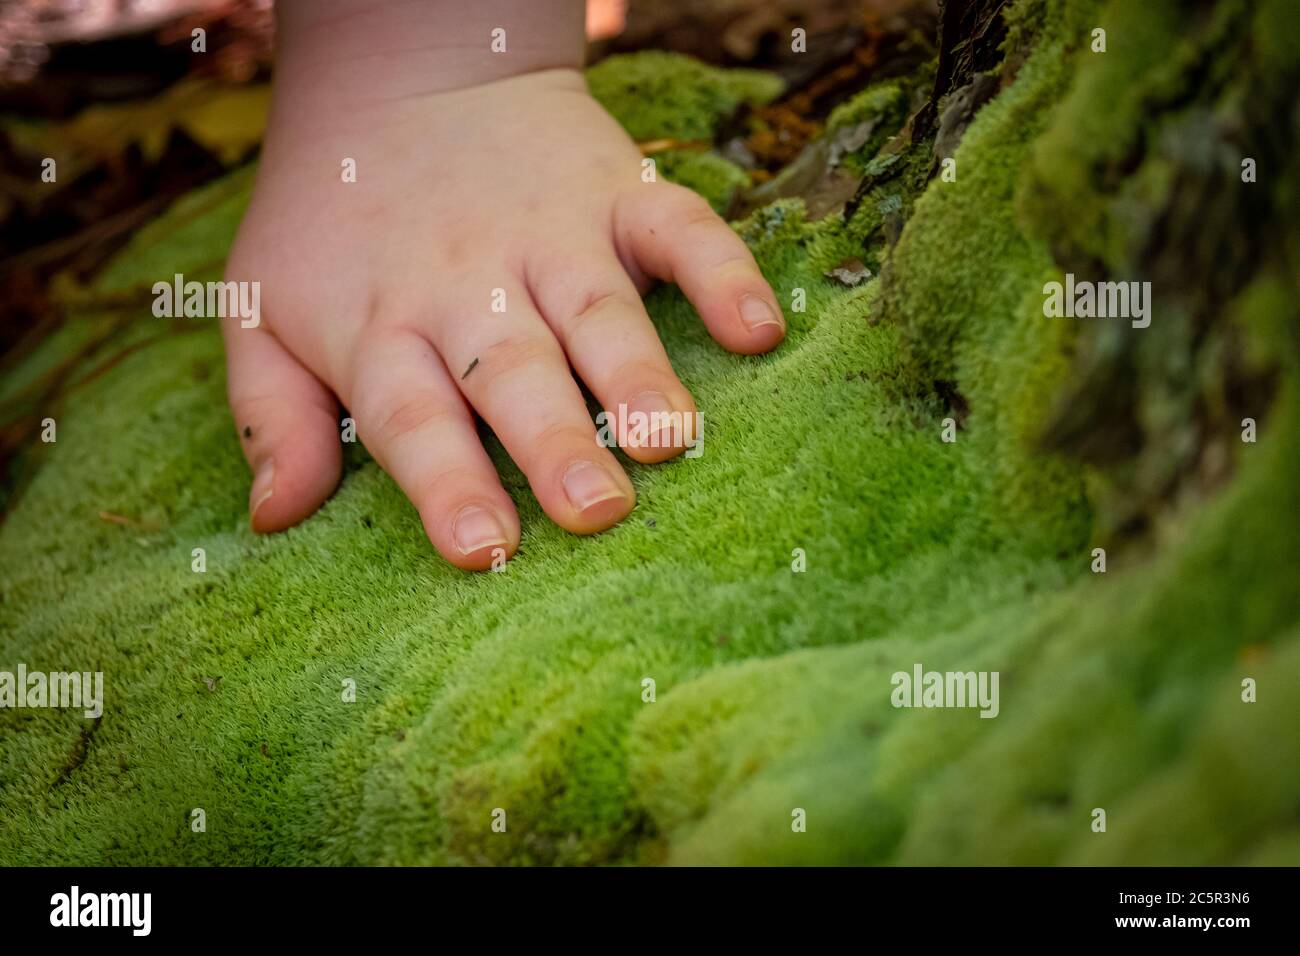 A child experiences new textures while out in the forest, touching what feels like the softest moss in the world. Stock Photo